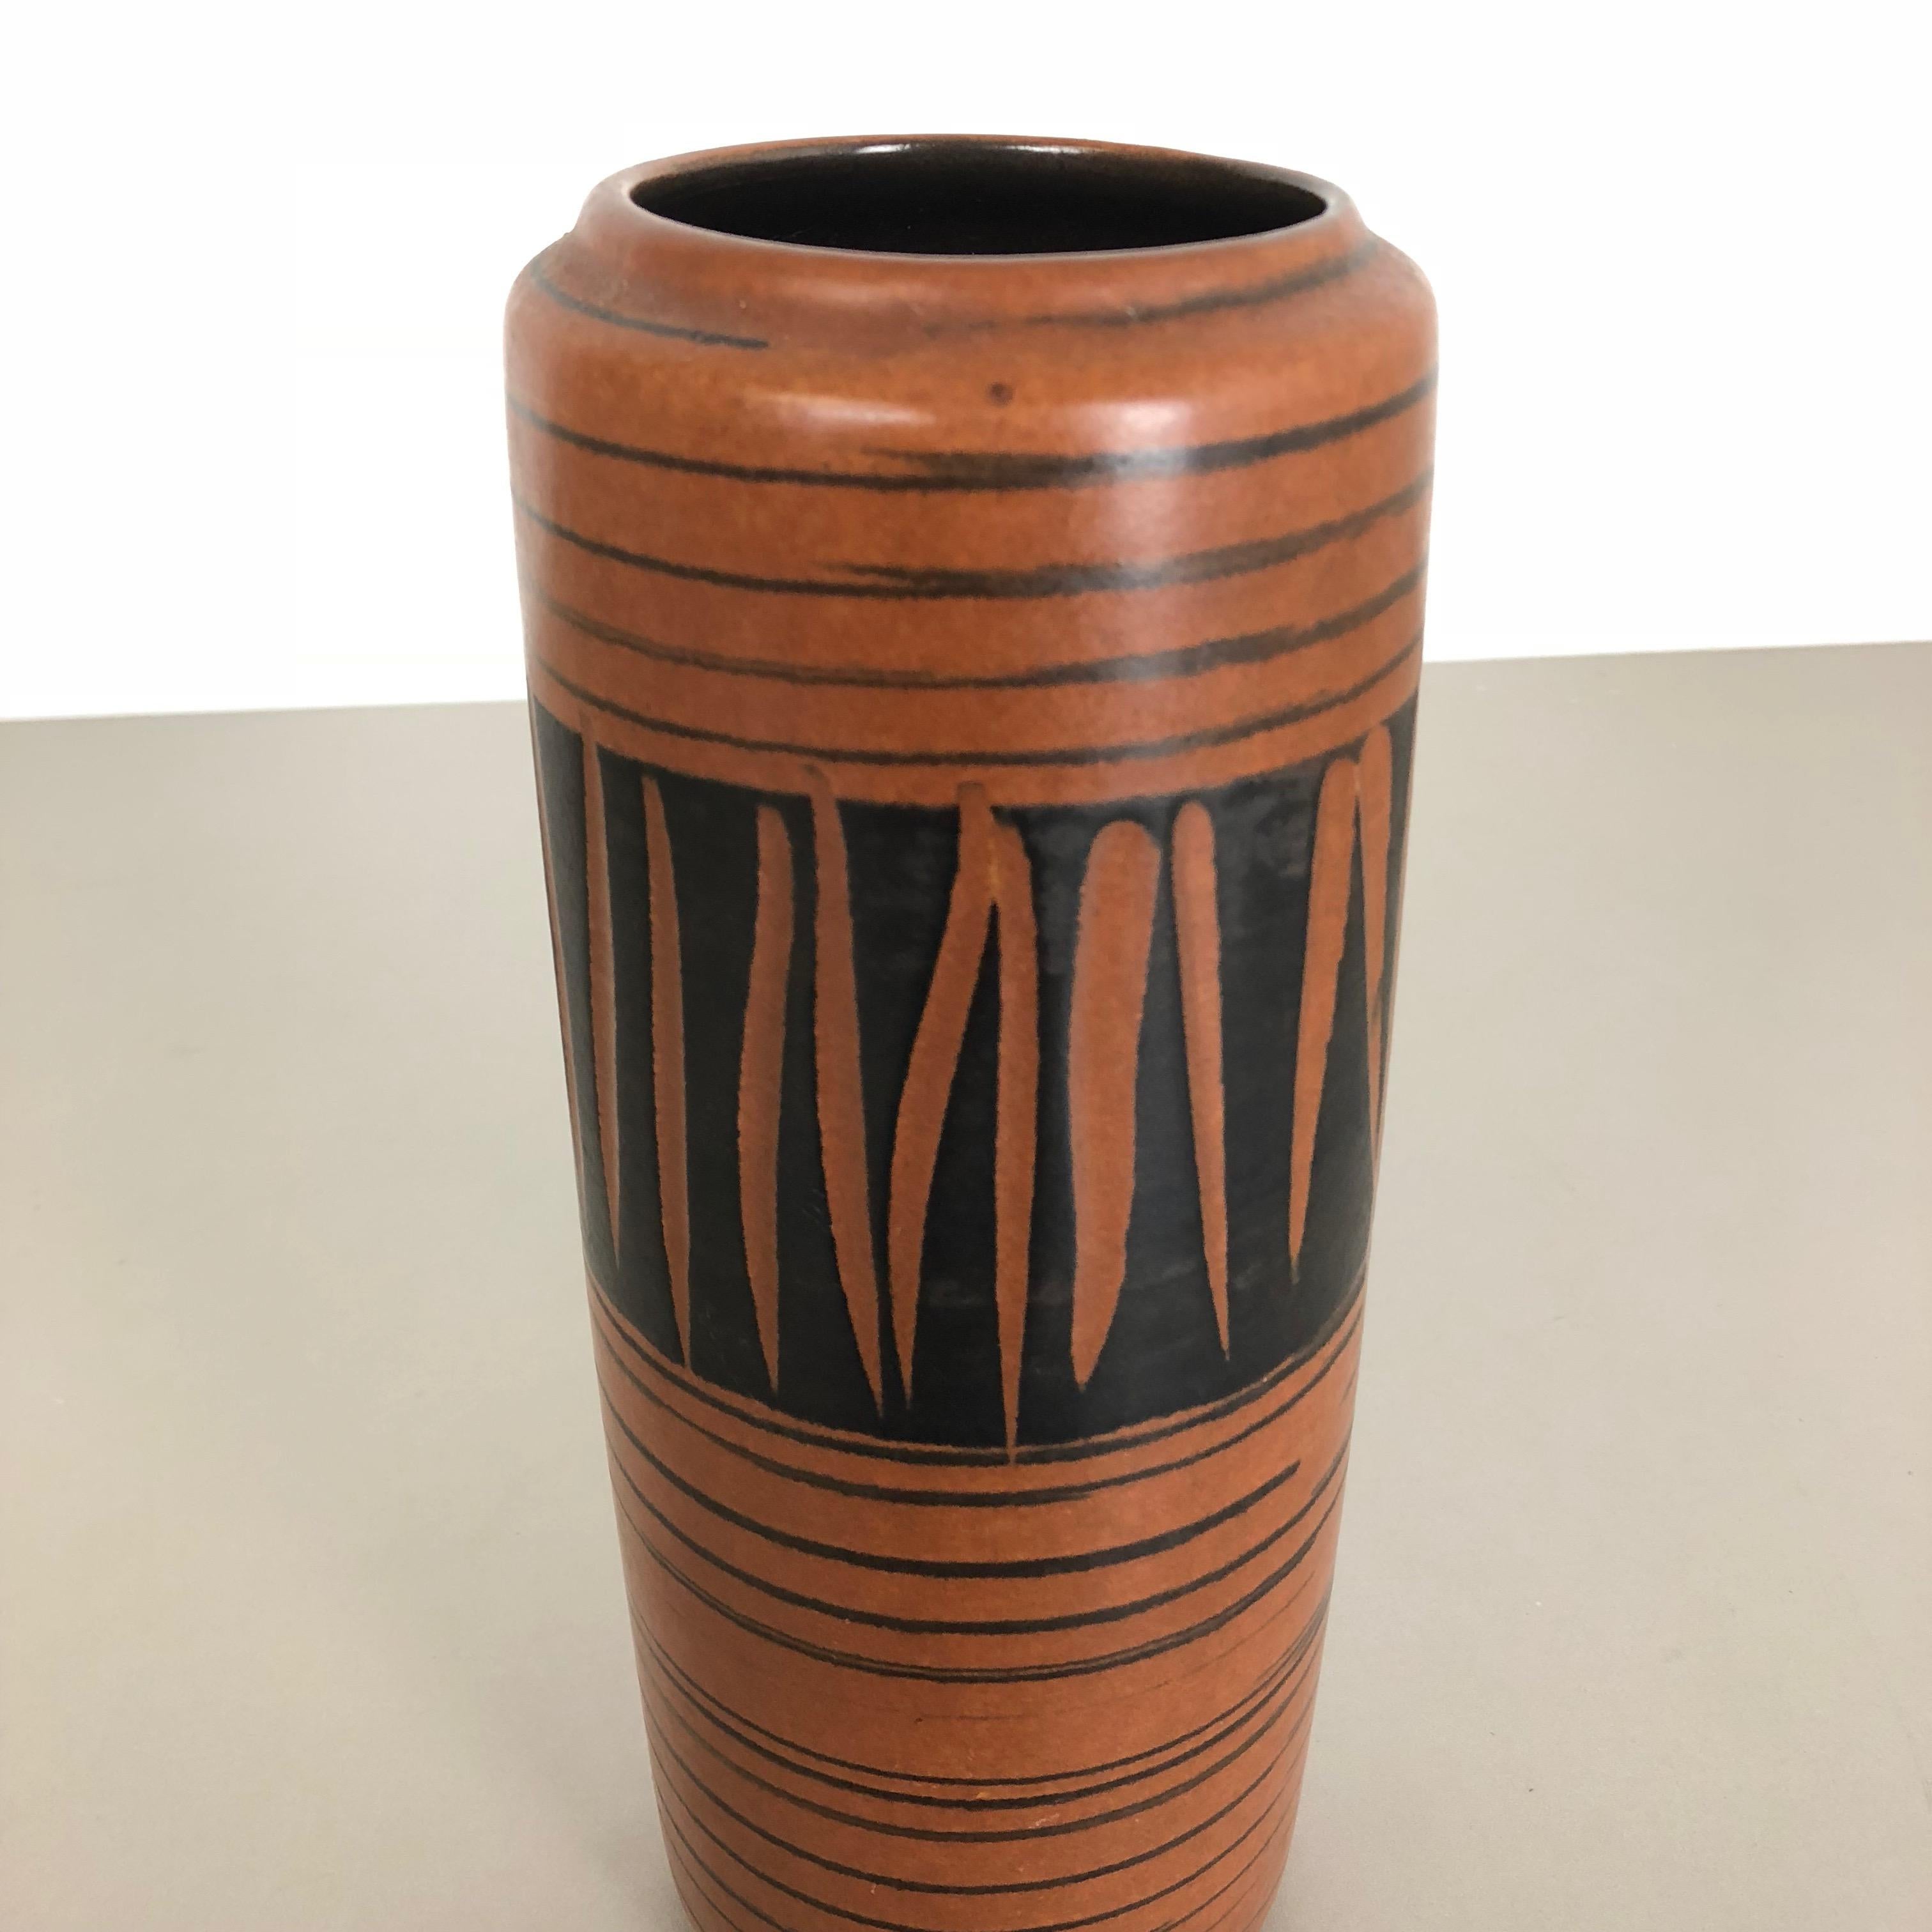 Extraordinary Vintage Pottery Fat Lava Vase Made by Scheurich, Germany, 1970s For Sale 5